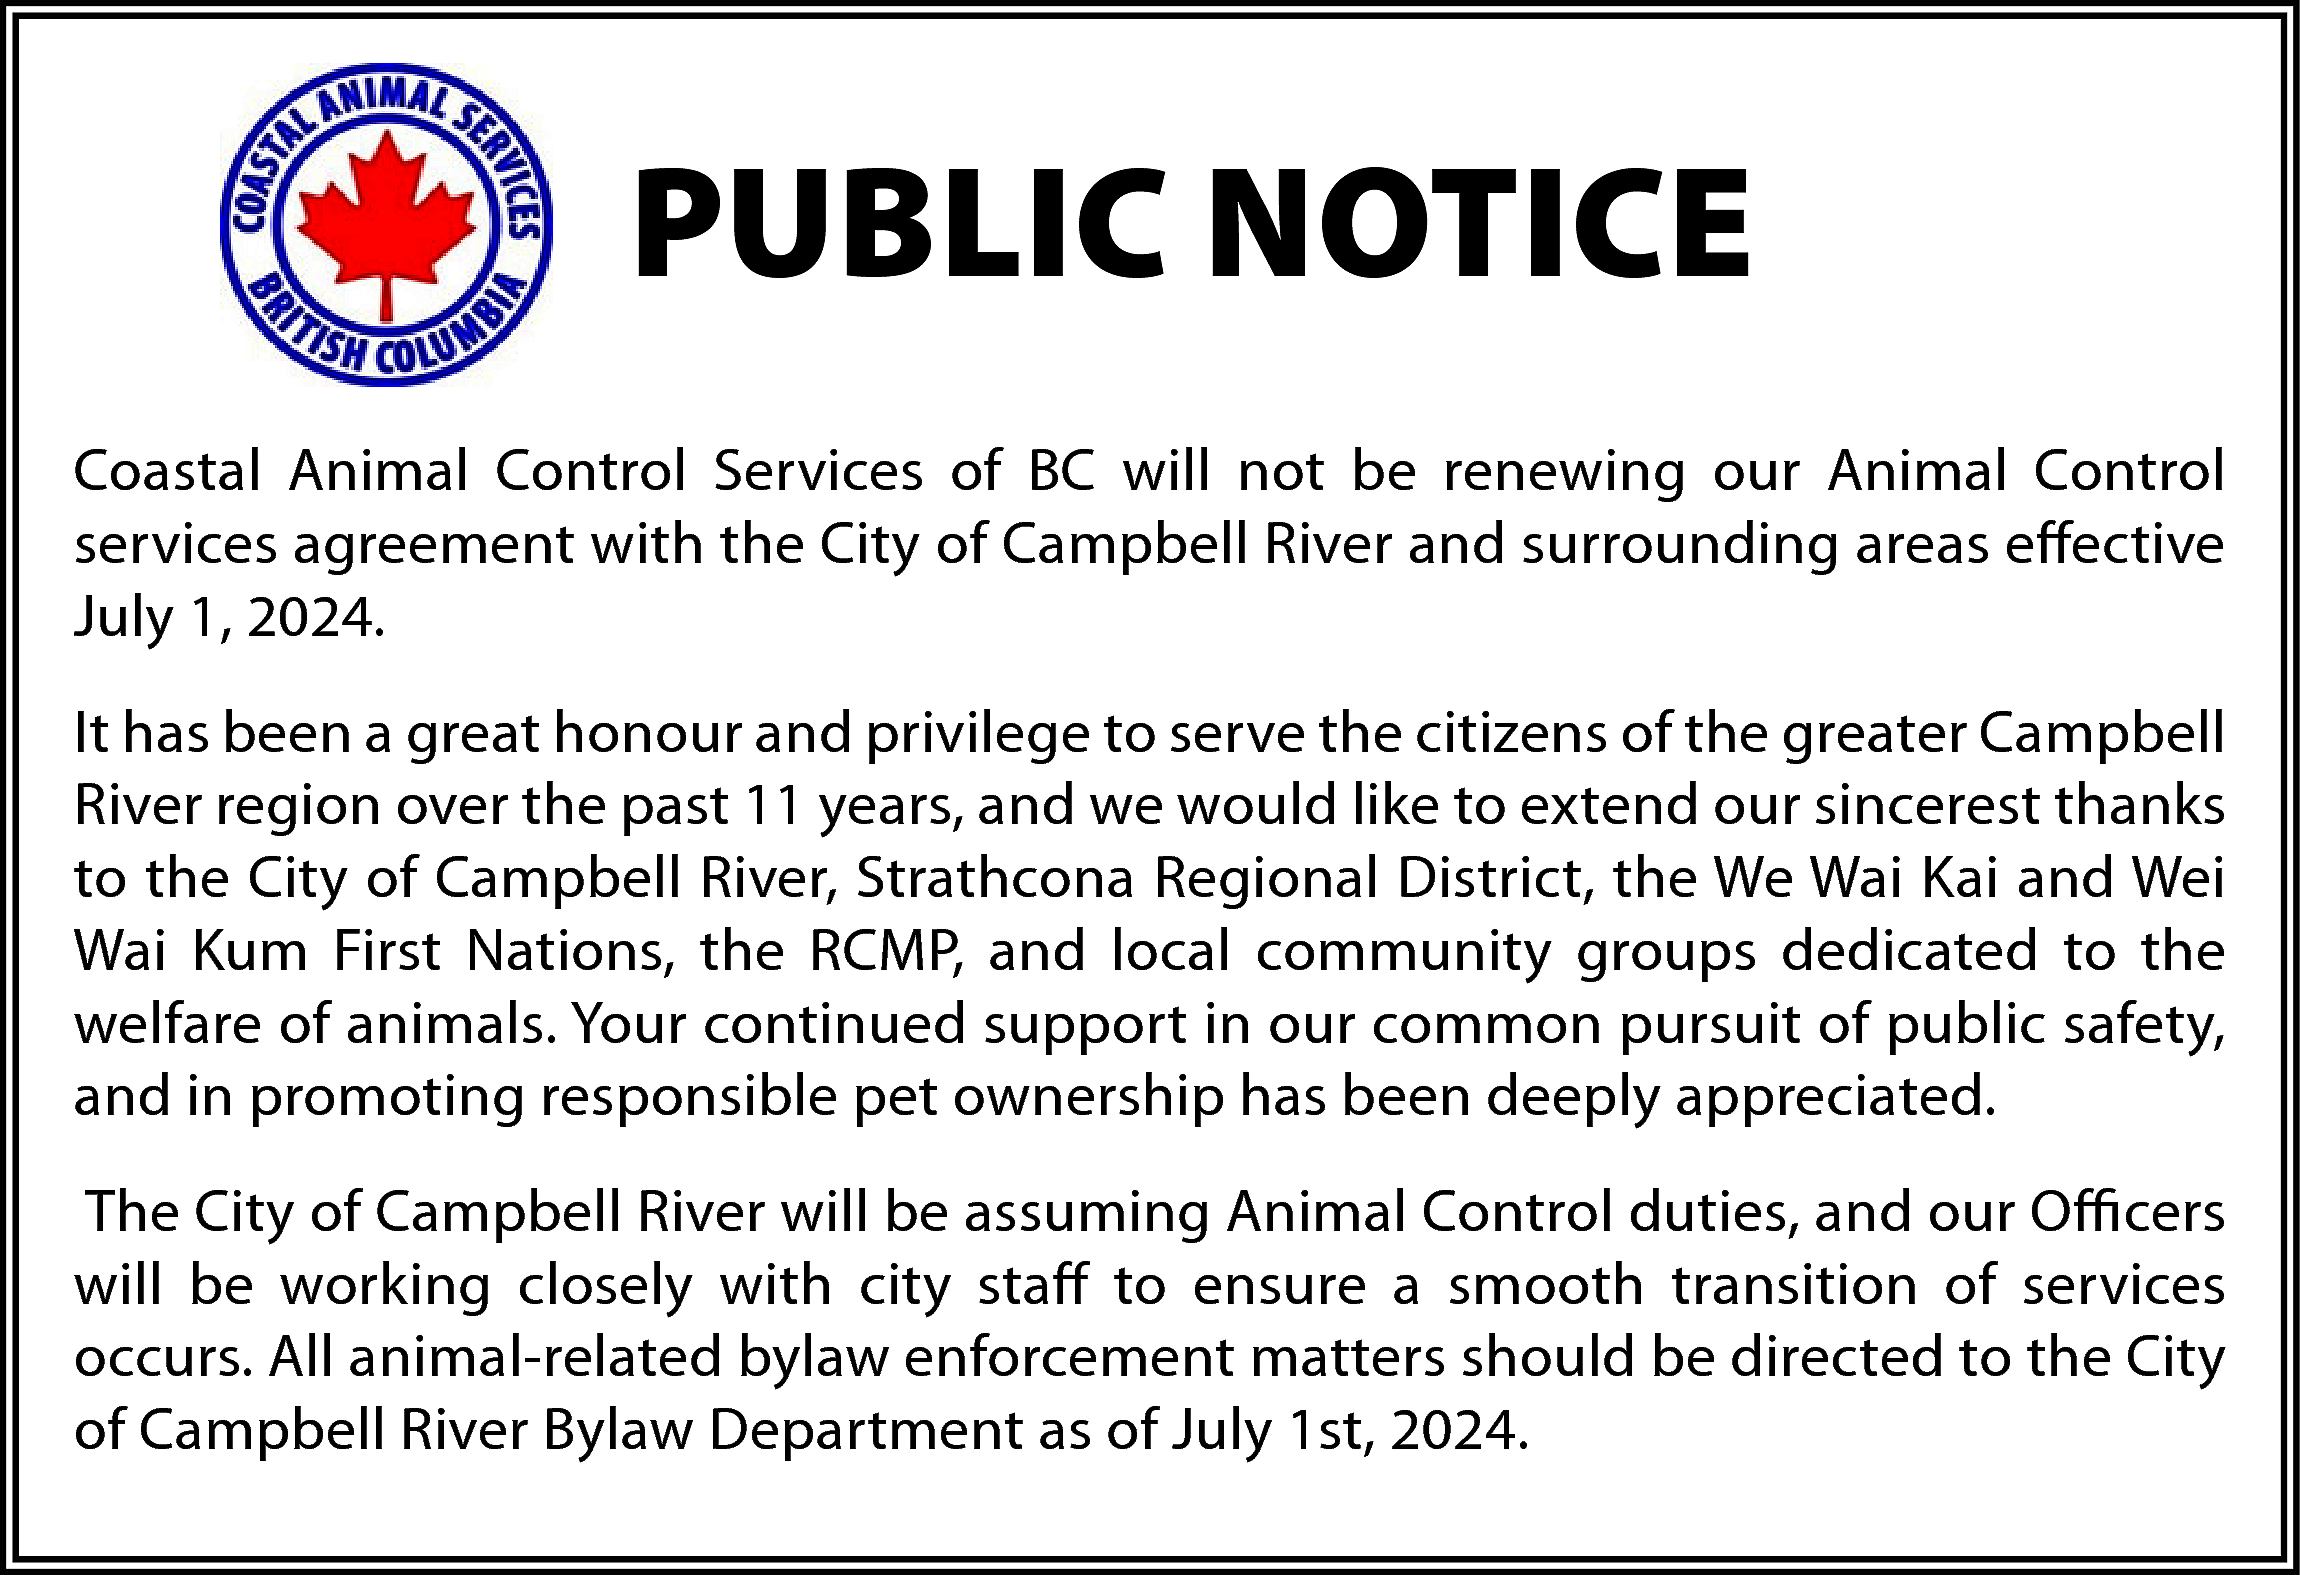 PUBLIC NOTICE <br>Coastal Animal Control  PUBLIC NOTICE  Coastal Animal Control Services of BC will not be renewing our Animal Control  services agreement with the City of Campbell River and surrounding areas effective  July 1, 2024.  It has been a great honour and privilege to serve the citizens of the greater Campbell  River region over the past 11 years, and we would like to extend our sincerest thanks  to the City of Campbell River, Strathcona Regional District, the We Wai Kai and Wei  Wai Kum First Nations, the RCMP, and local community groups dedicated to the  welfare of animals. Your continued support in our common pursuit of public safety,  and in promoting responsible pet ownership has been deeply appreciated.  The City of Campbell River will be assuming Animal Control duties, and our Officers  will be working closely with city staff to ensure a smooth transition of services  occurs. All animal-related bylaw enforcement matters should be directed to the City  of Campbell River Bylaw Department as of July 1st, 2024.    